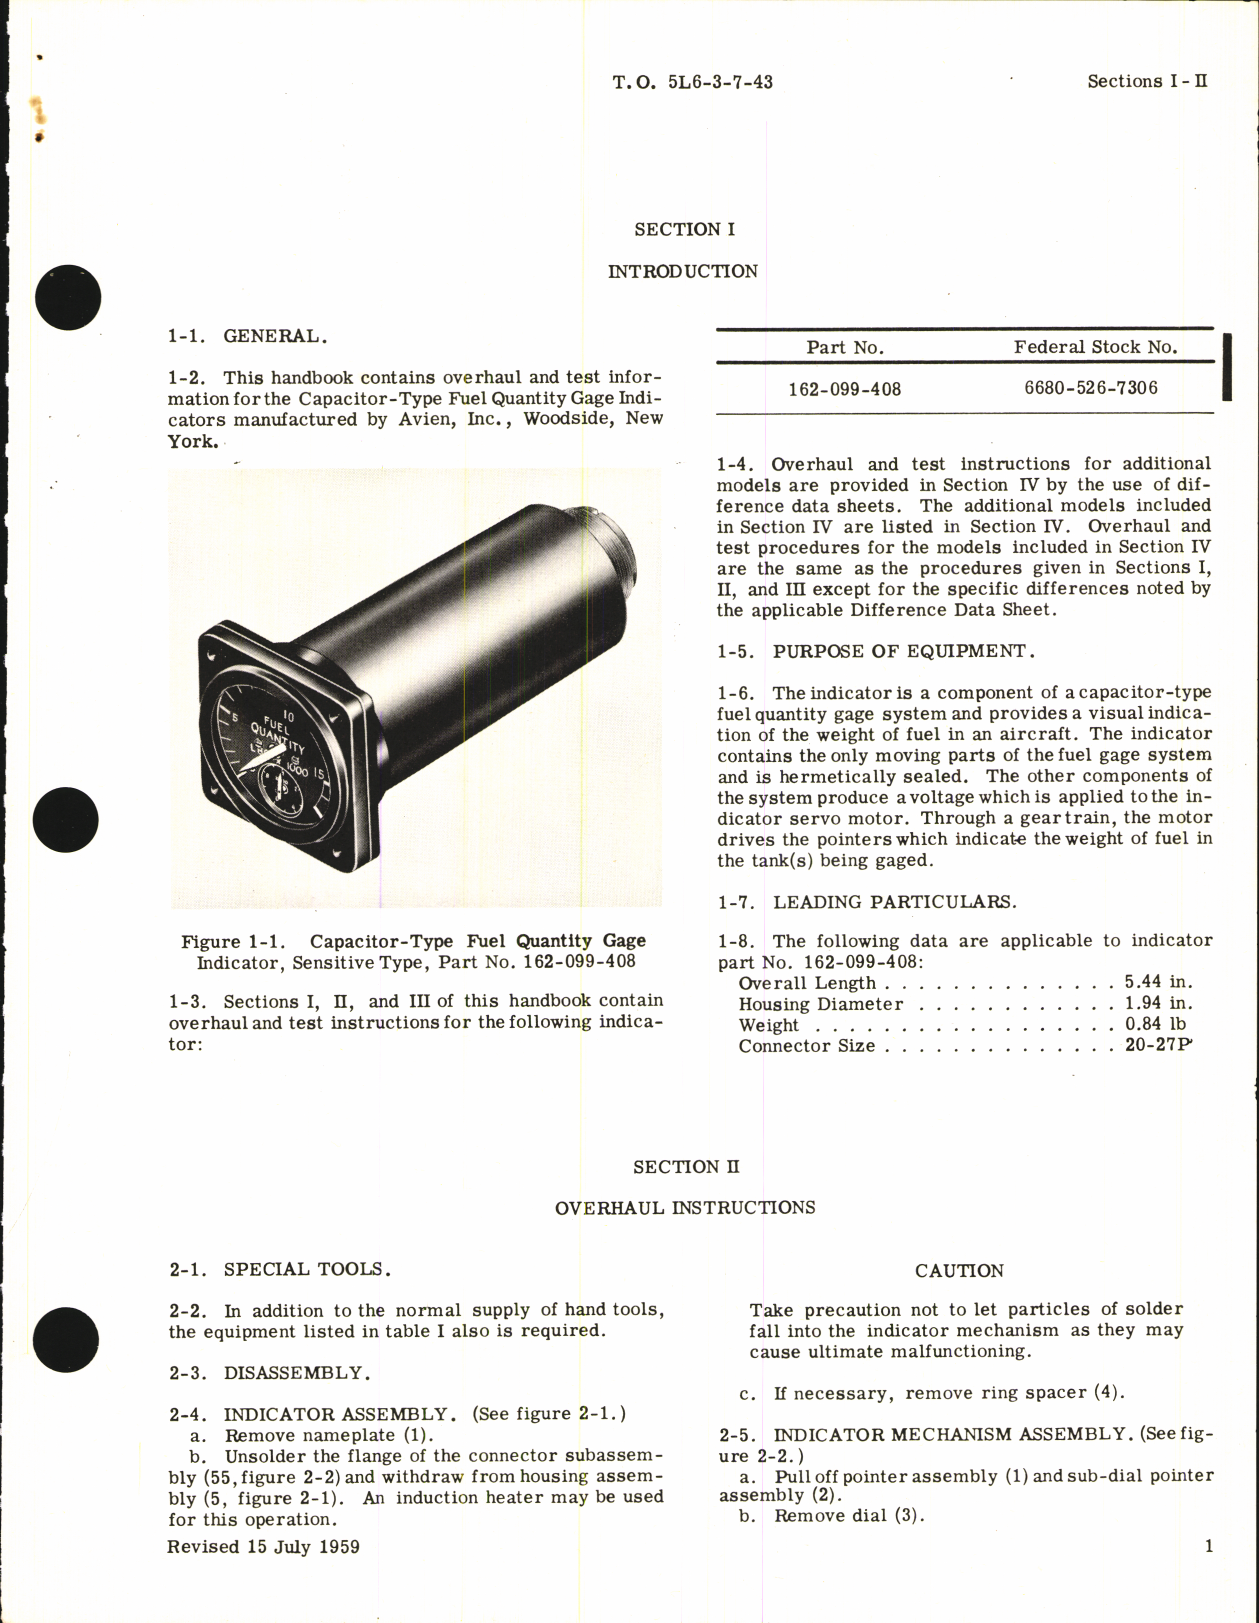 Sample page 5 from AirCorps Library document: Overhaul Instructions for Capacitor-Type Fuel Quantity Gage Indicators (Sensitive Type)